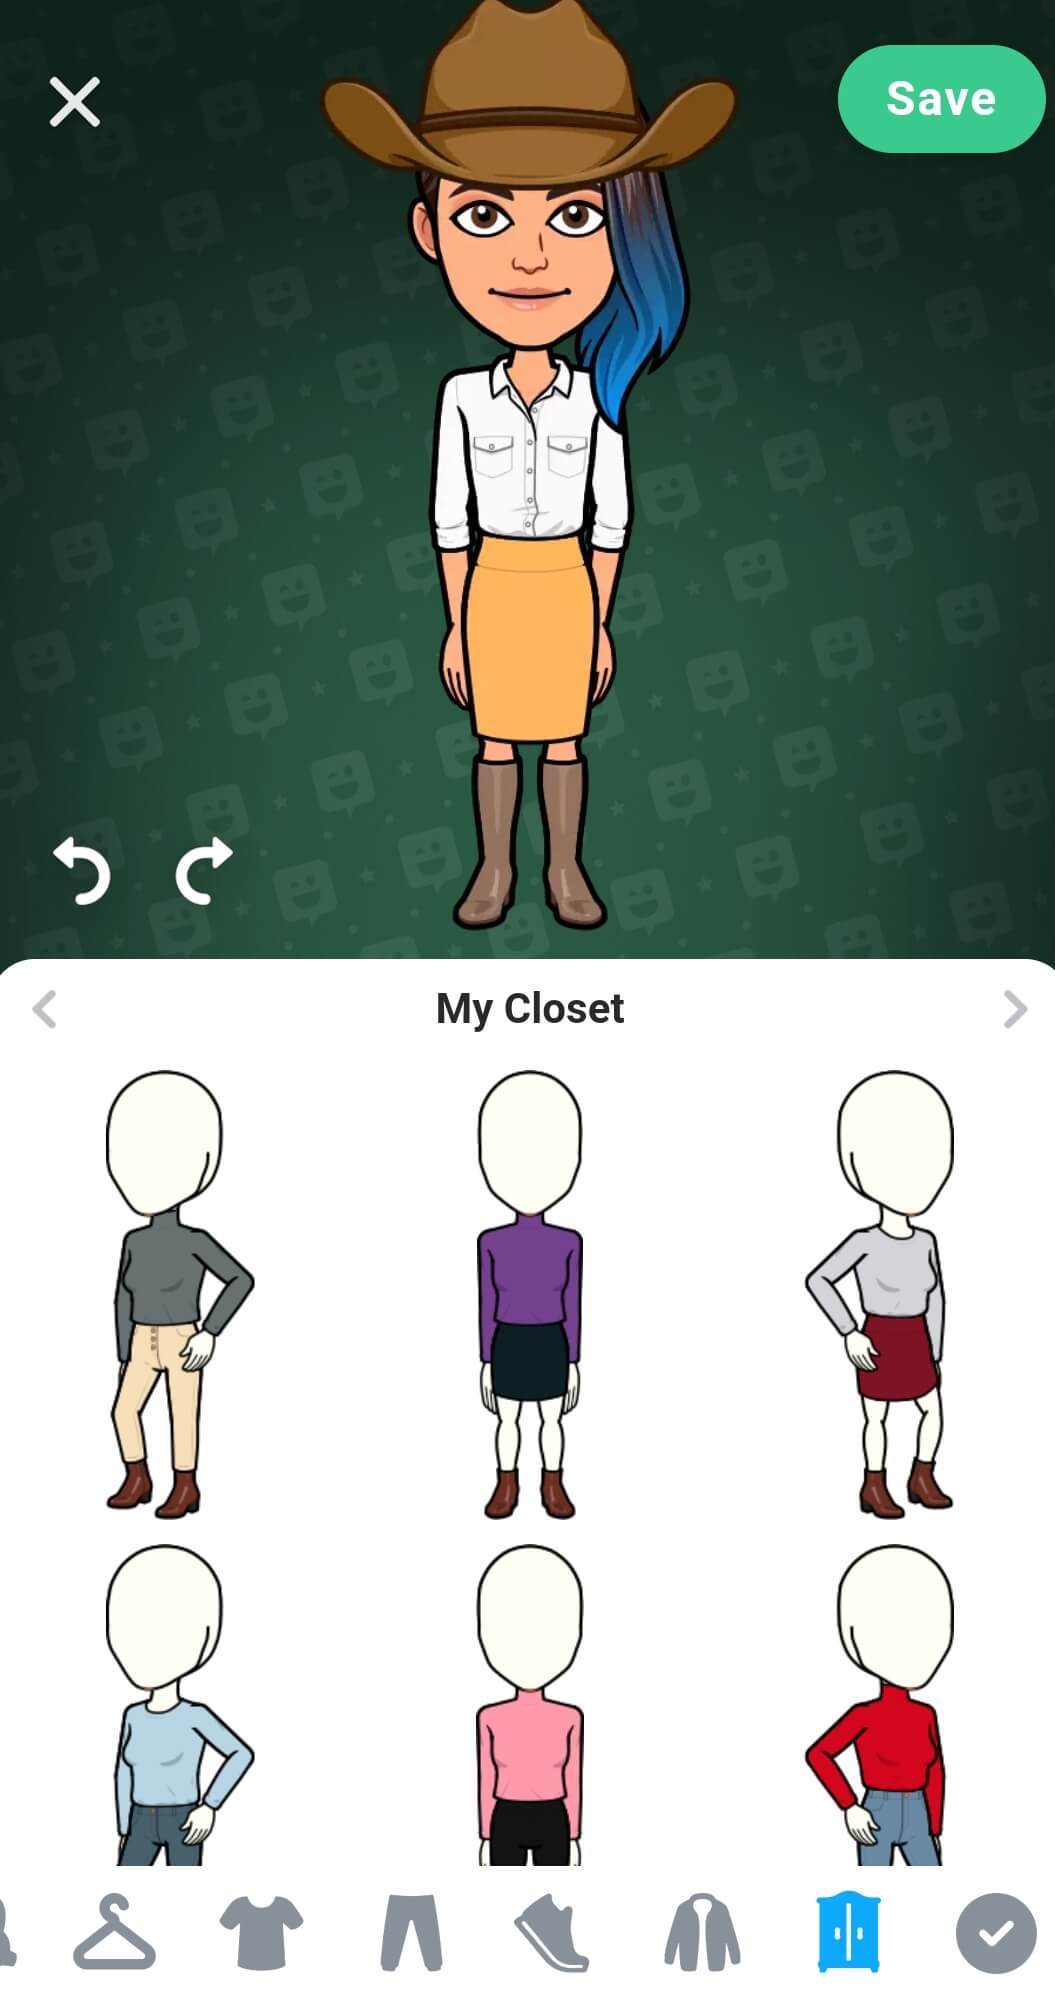 A variety of outfits are saved in the avatar closet on the bottom half of the screen. The save button is at the top right corner.